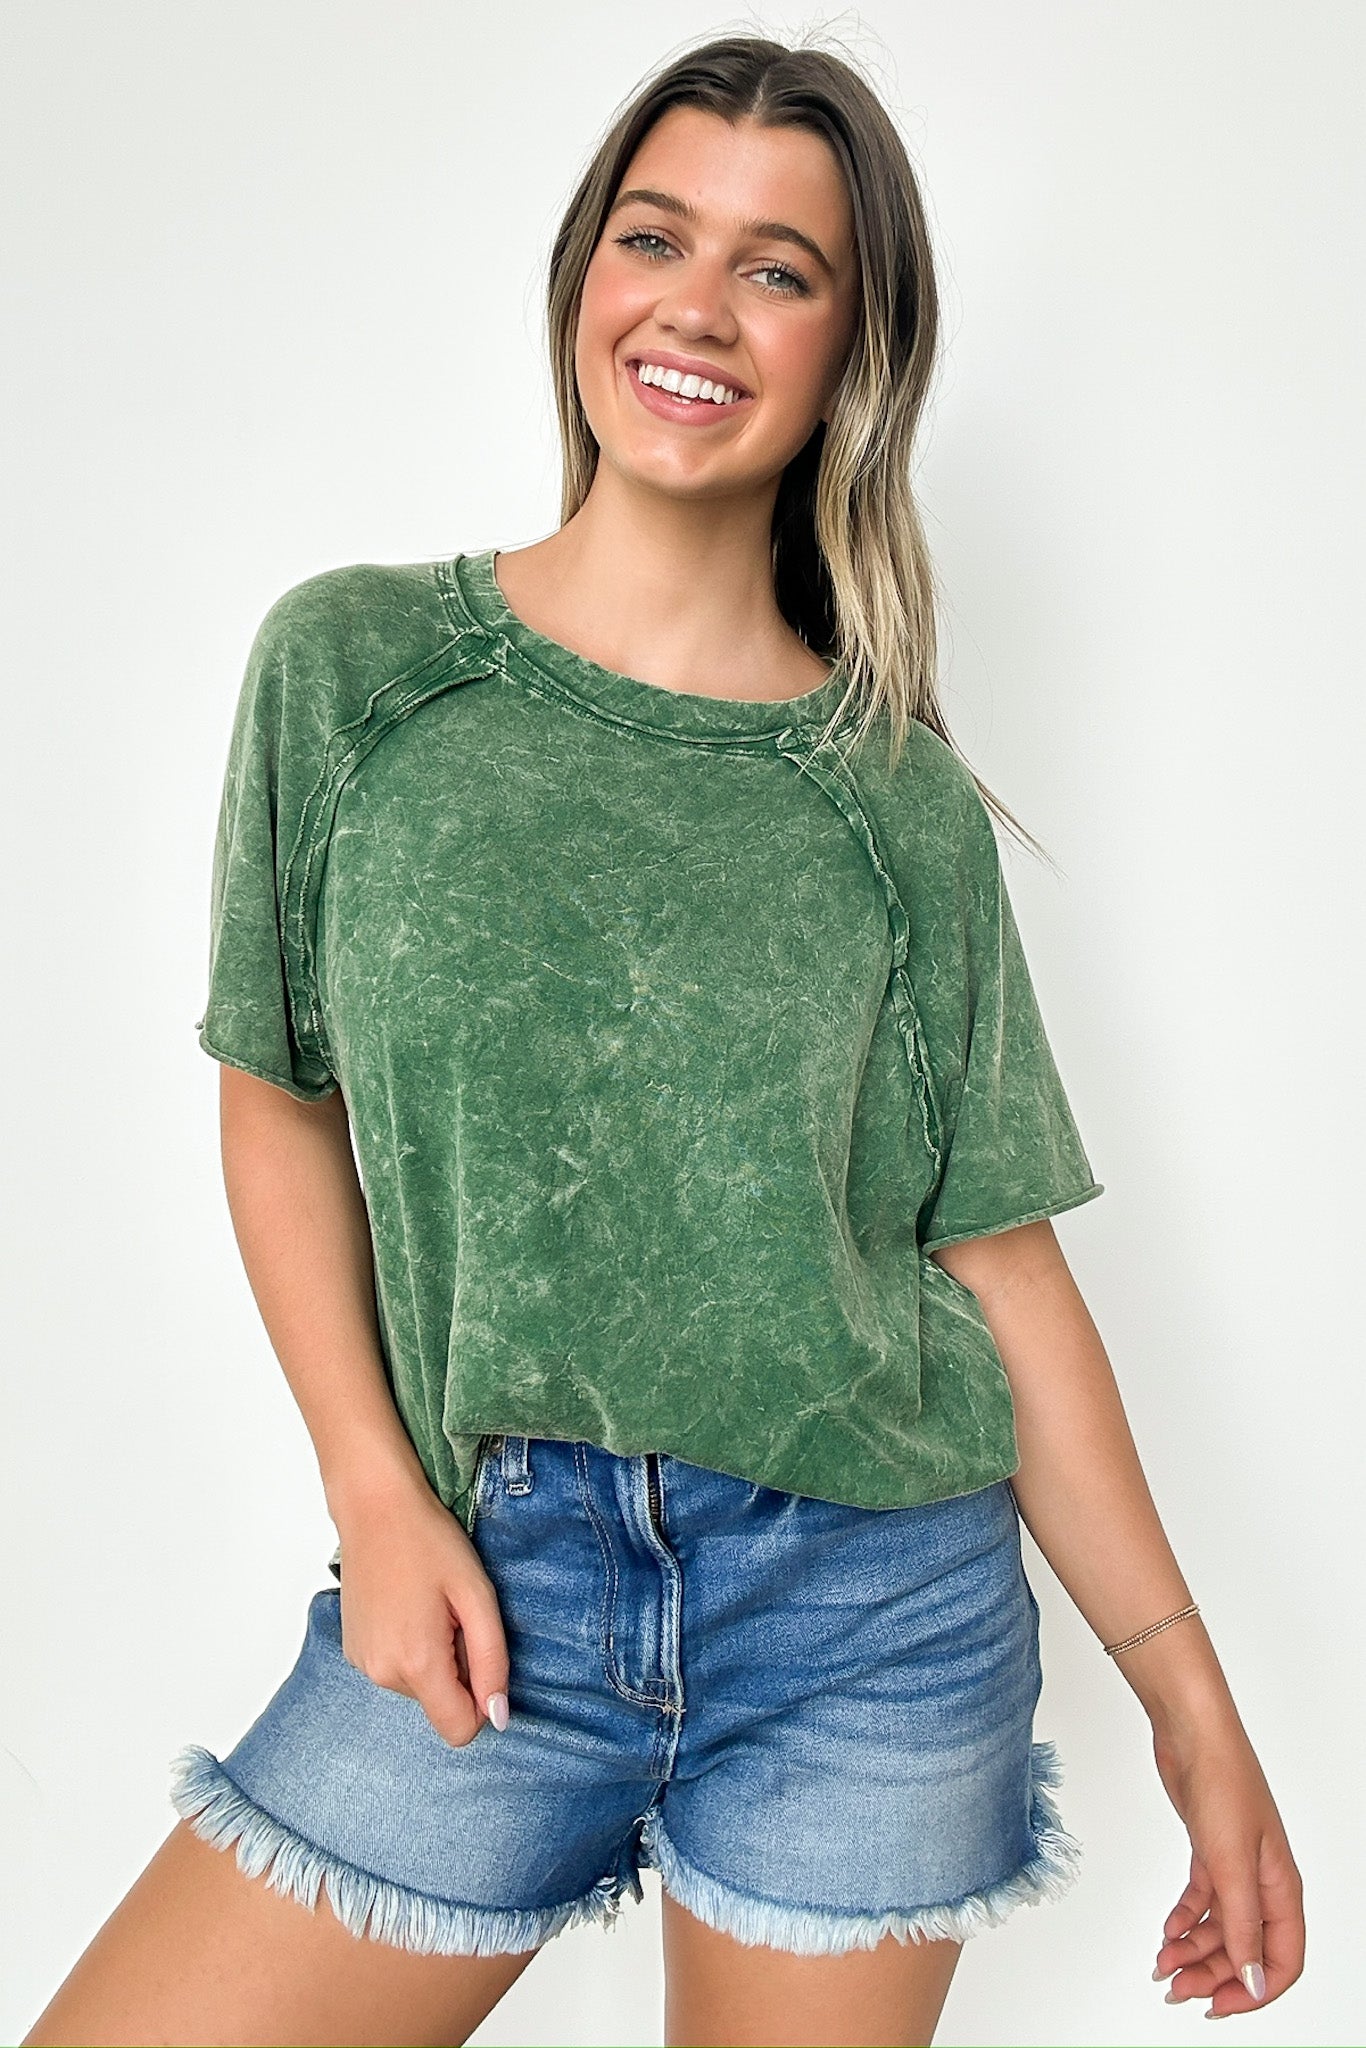 Dark Green / S Carowyn Mineral Wash Relaxed Fit Top - BACK IN STOCK - Madison and Mallory